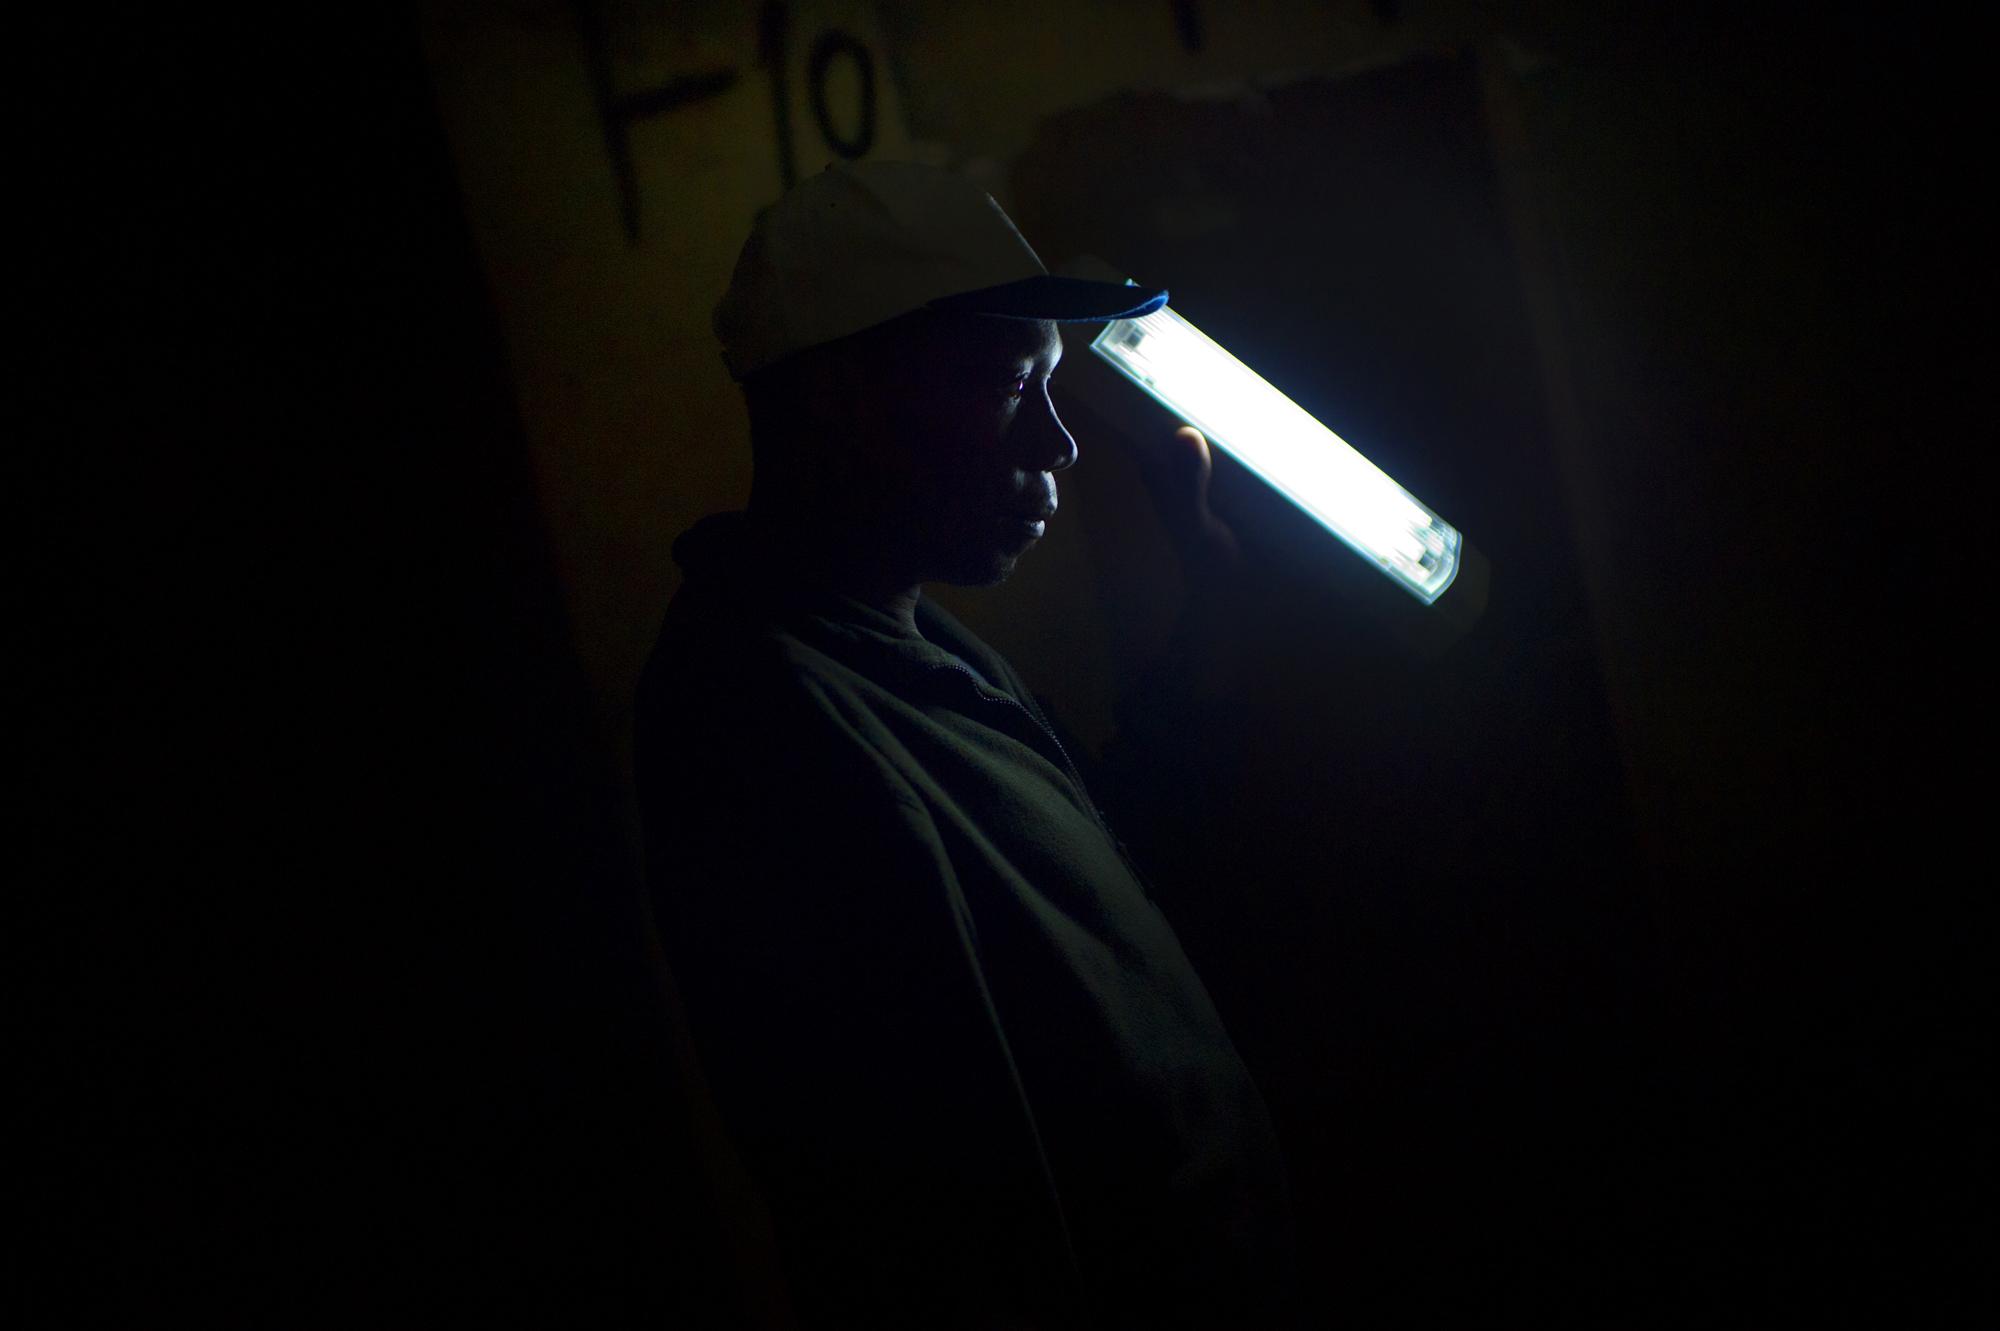 Into the shadows - Johannesburg, South Africa. June 2011. An MSF outreach...